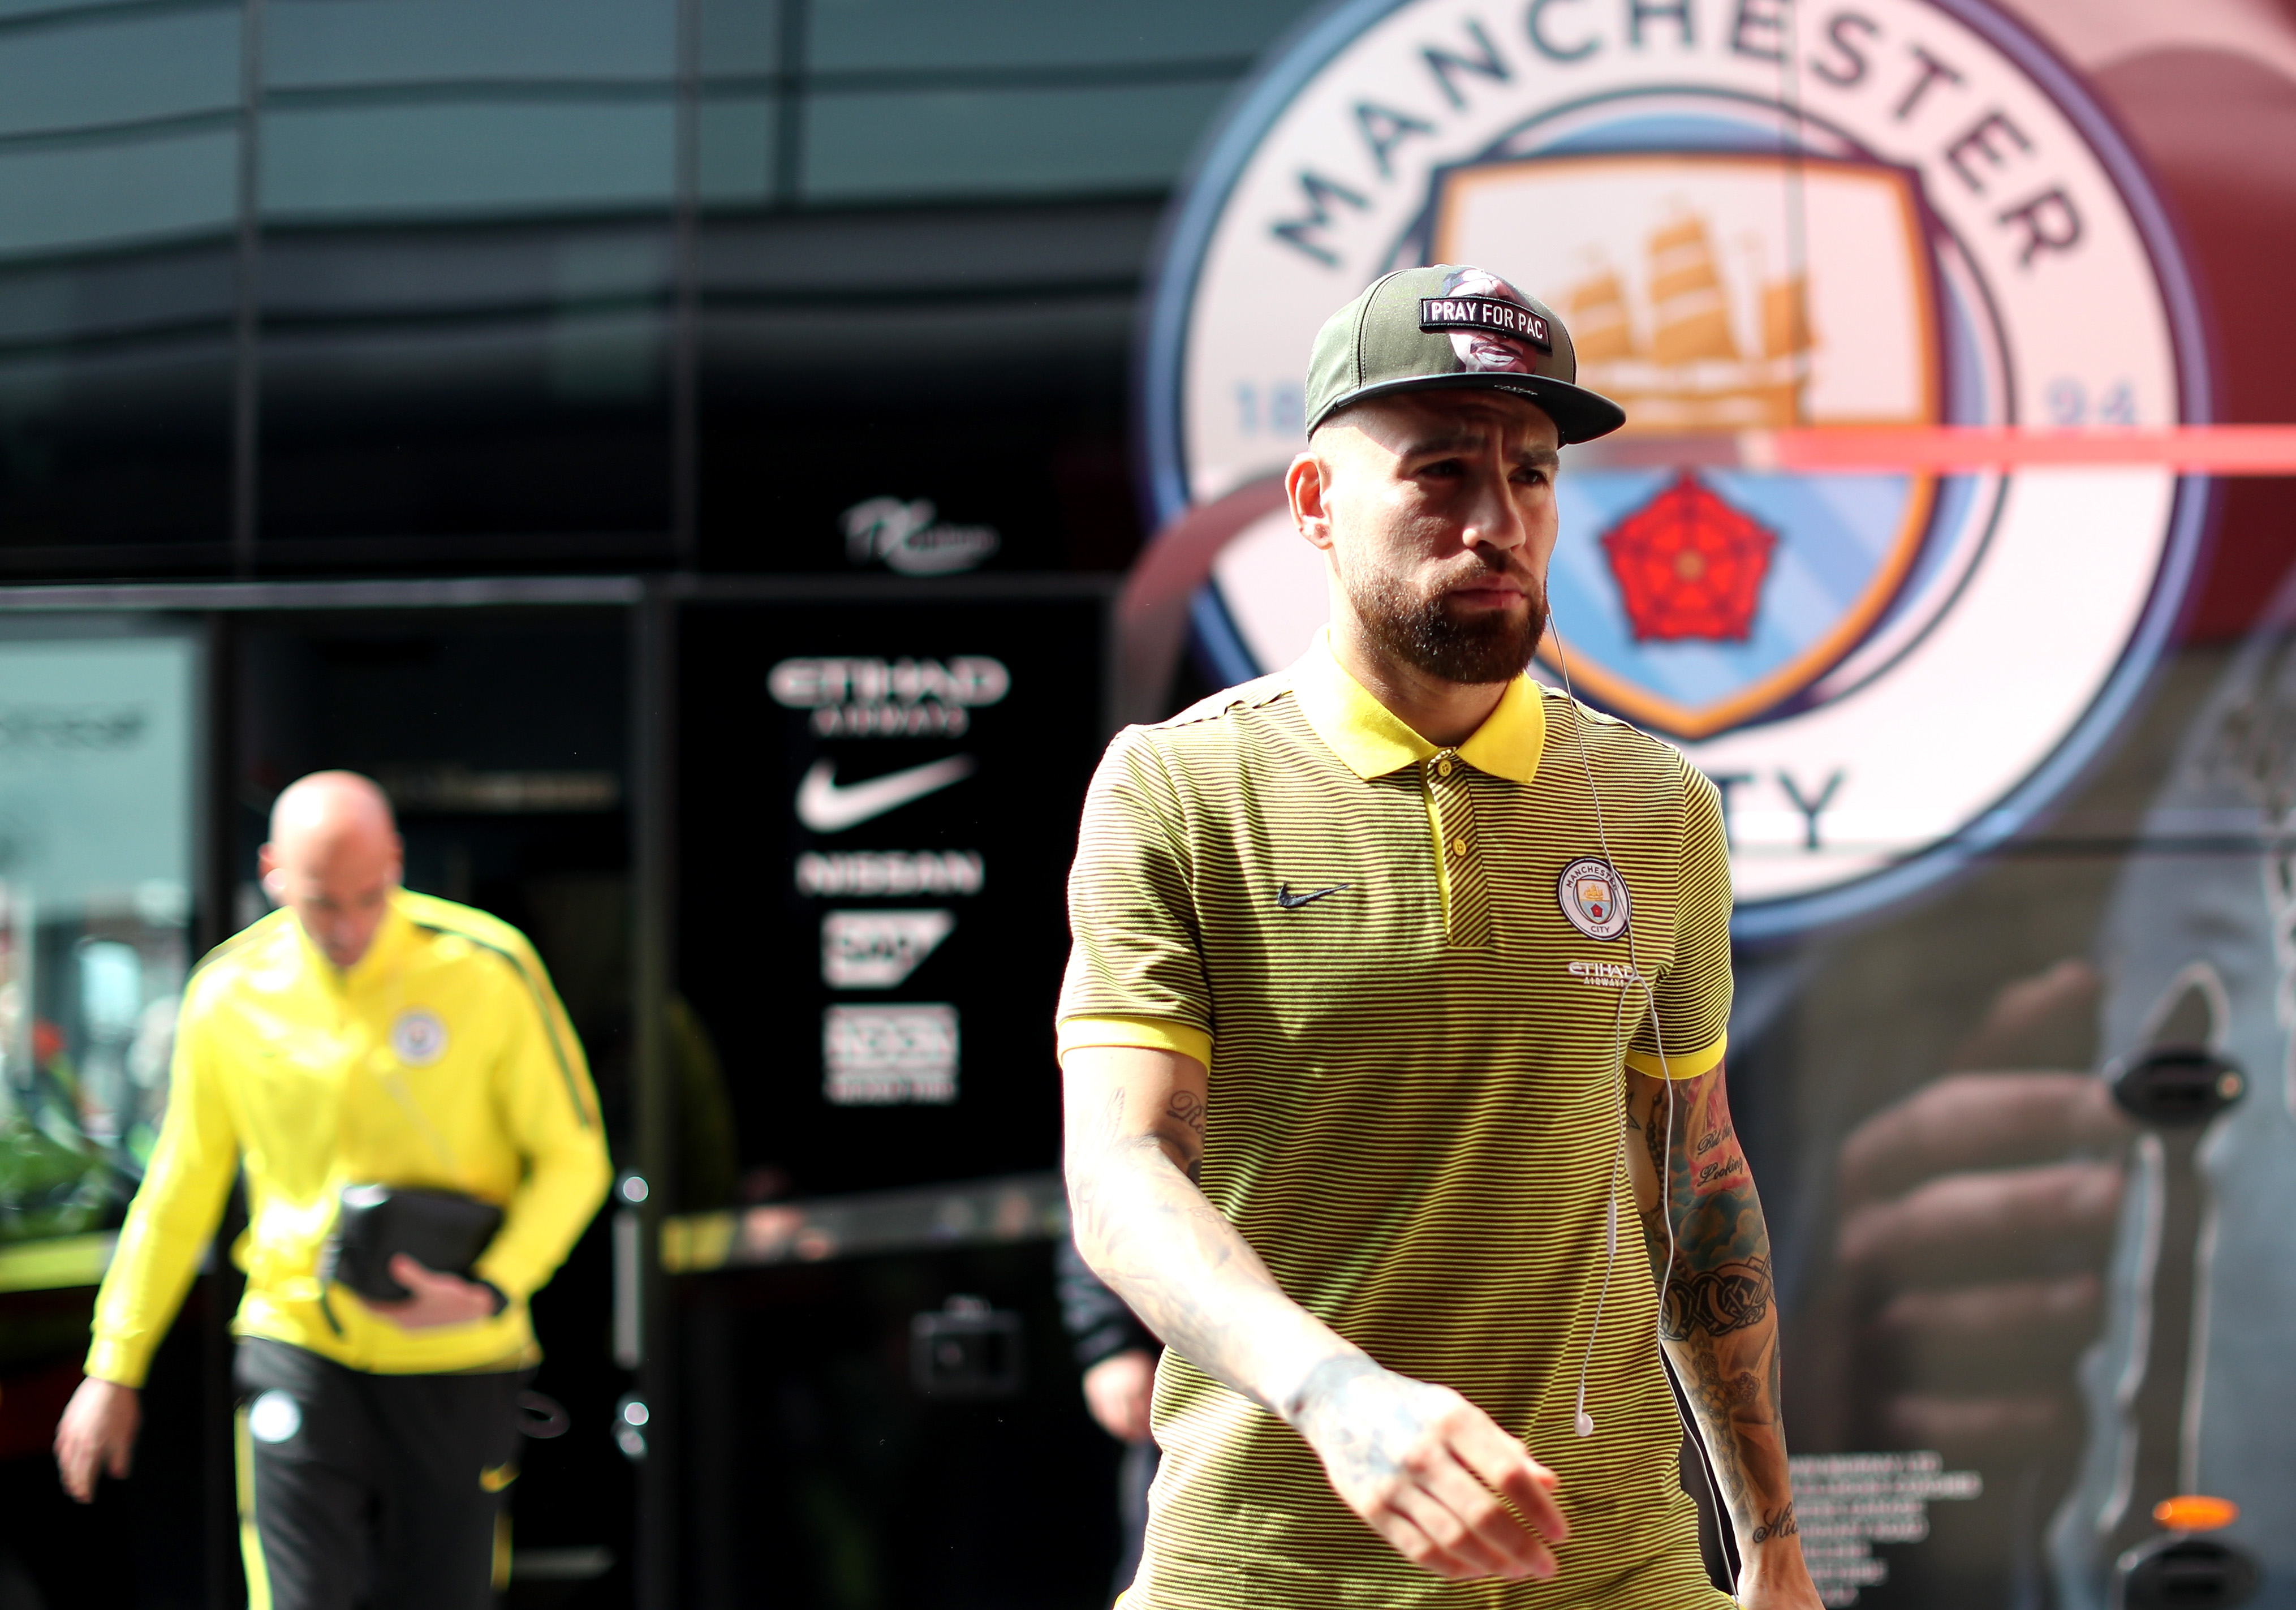 MIDDLESBROUGH, ENGLAND - APRIL 30: Nicolas Otamendi of Manchester City arrives at the stadium prior to the Premier League match between Middlesbrough and Manchester City at the Riverside Stadium on April 30, 2017 in Middlesbrough, England.  (Photo by Ian MacNicol/Getty Images)